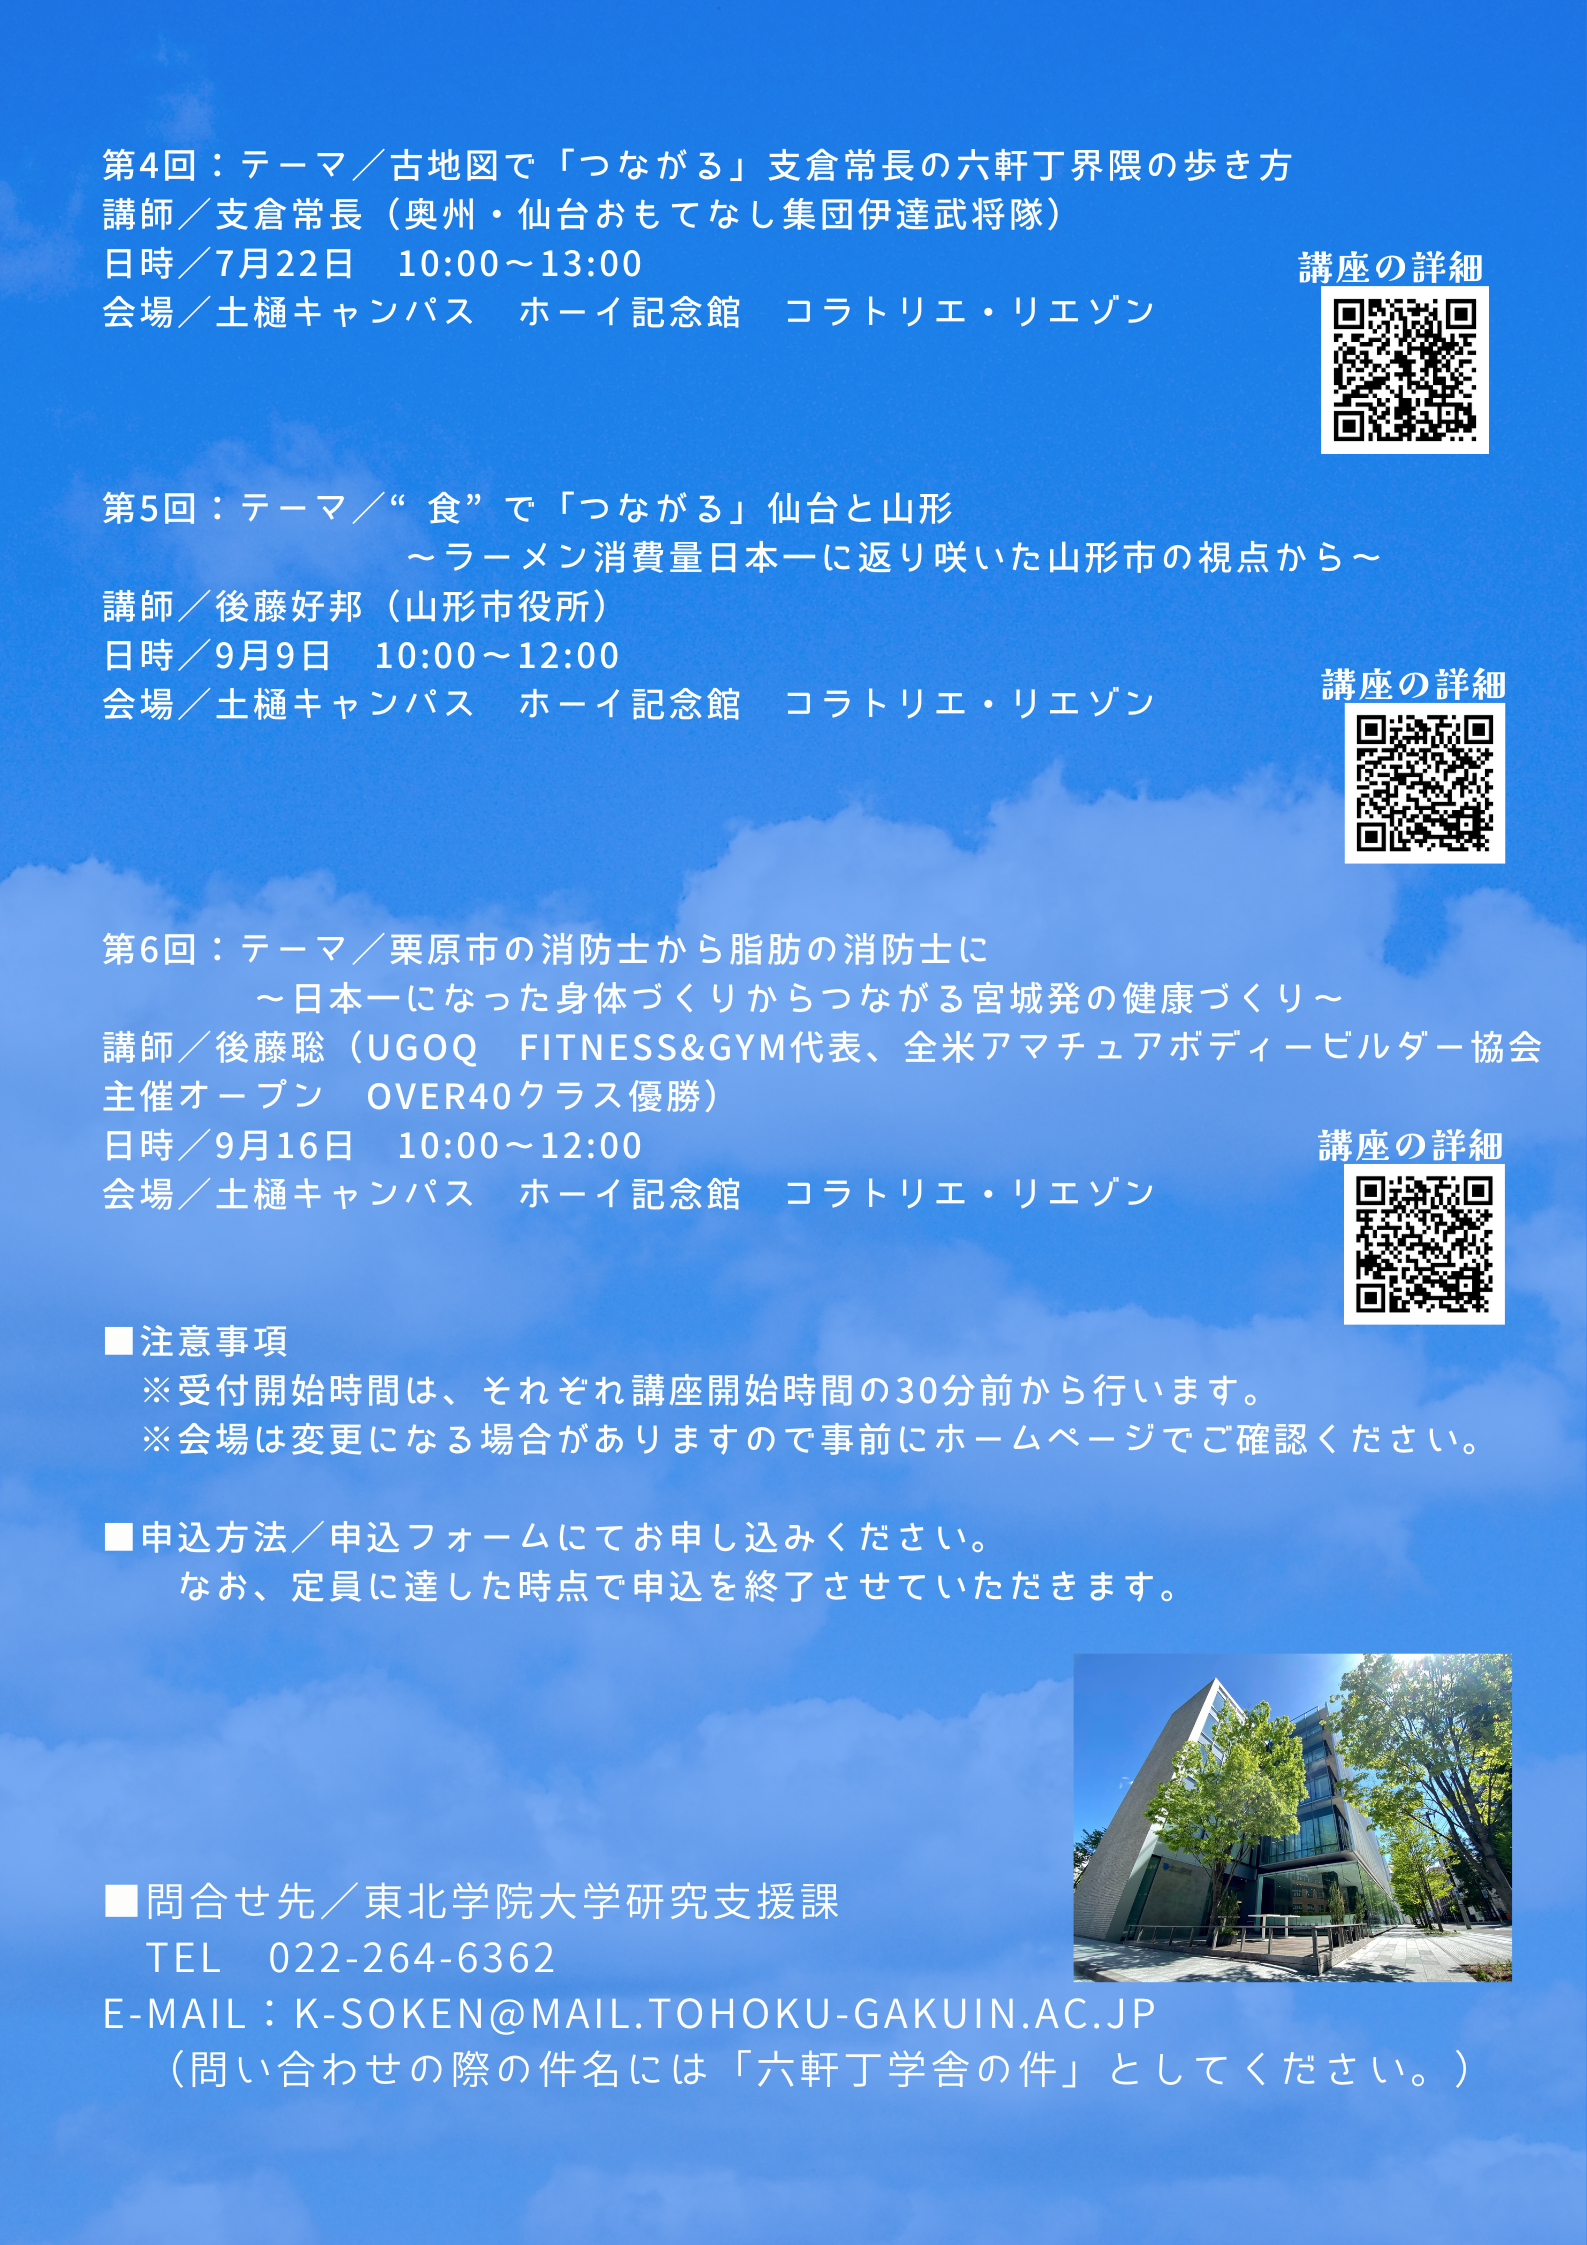 https://www.tohoku-gakuin.ac.jp/research/compatibility/content/aa7145a1cd40b2567eb7ce9634380e2f5555a764.png